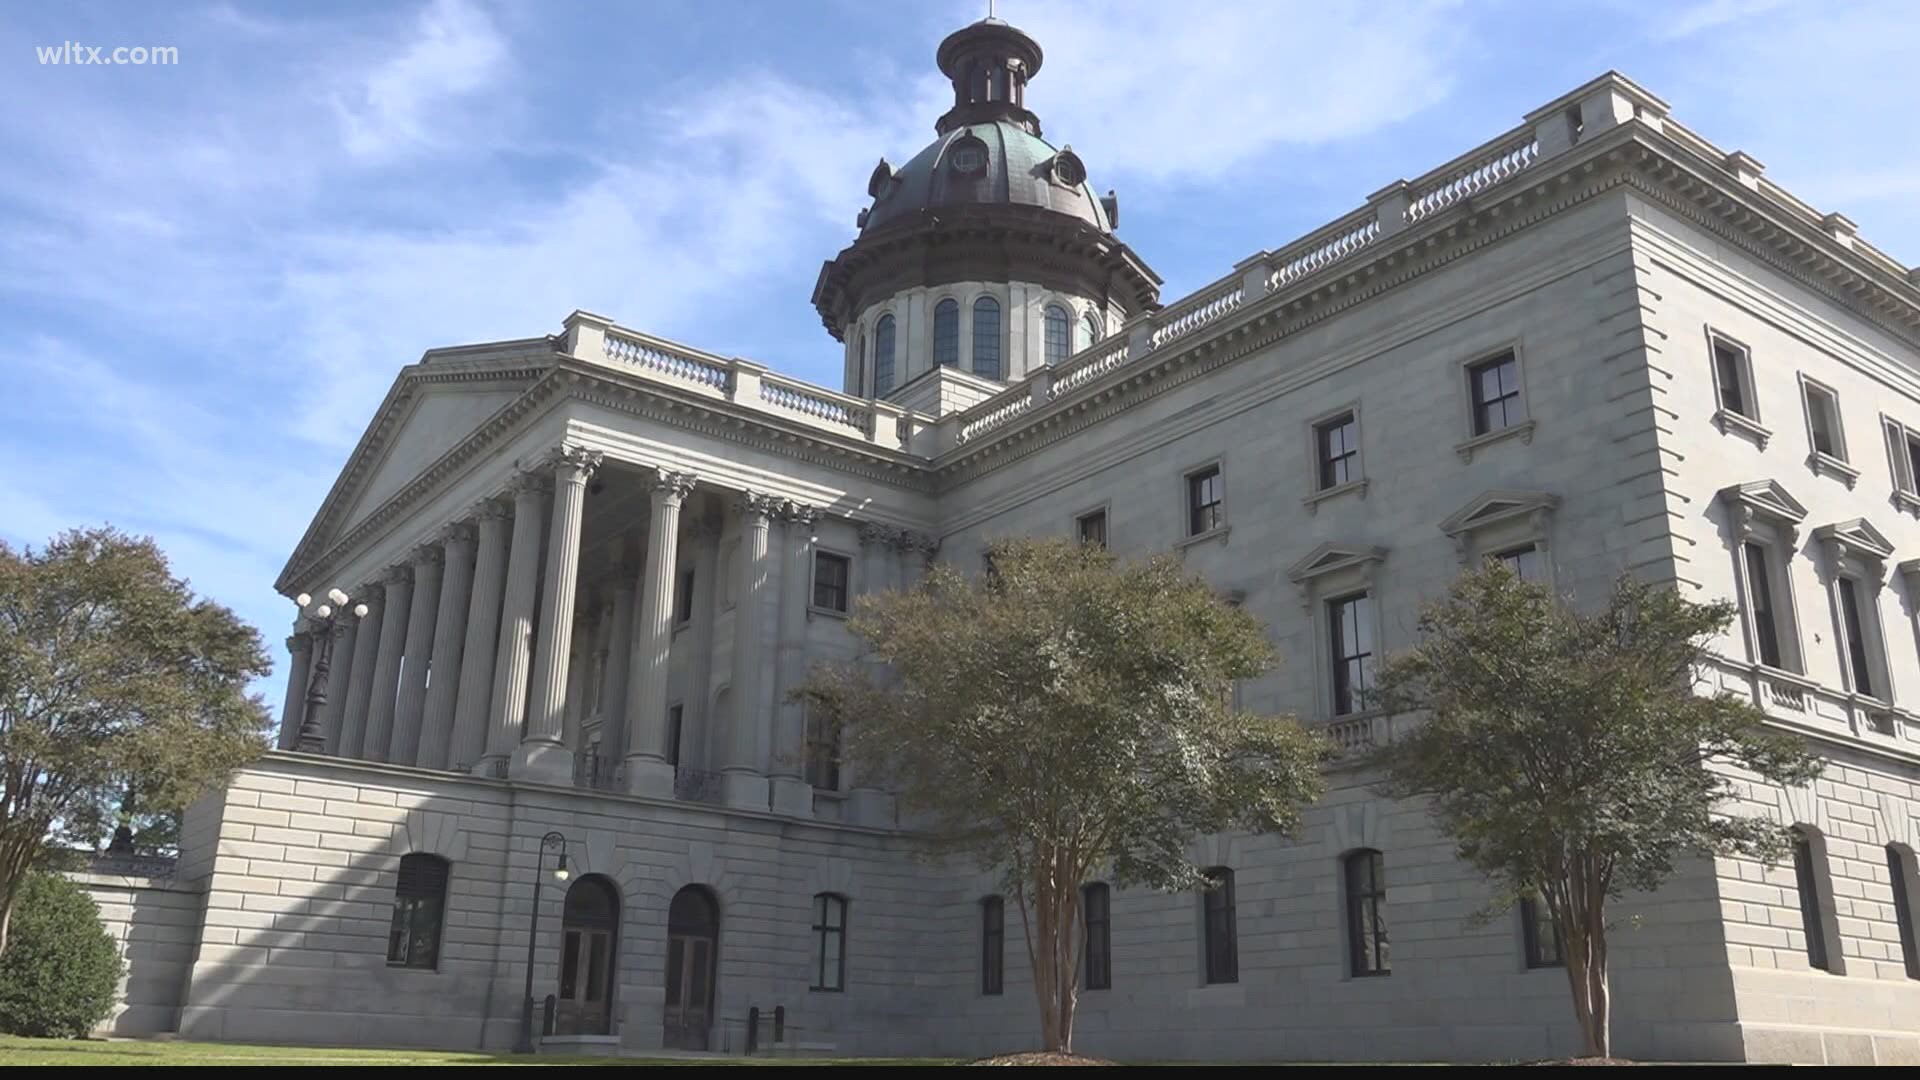 A SC Senate committee will consider whether to restore small annual raises for most teachers delayed because of budget uncertainties due to Covid-19.